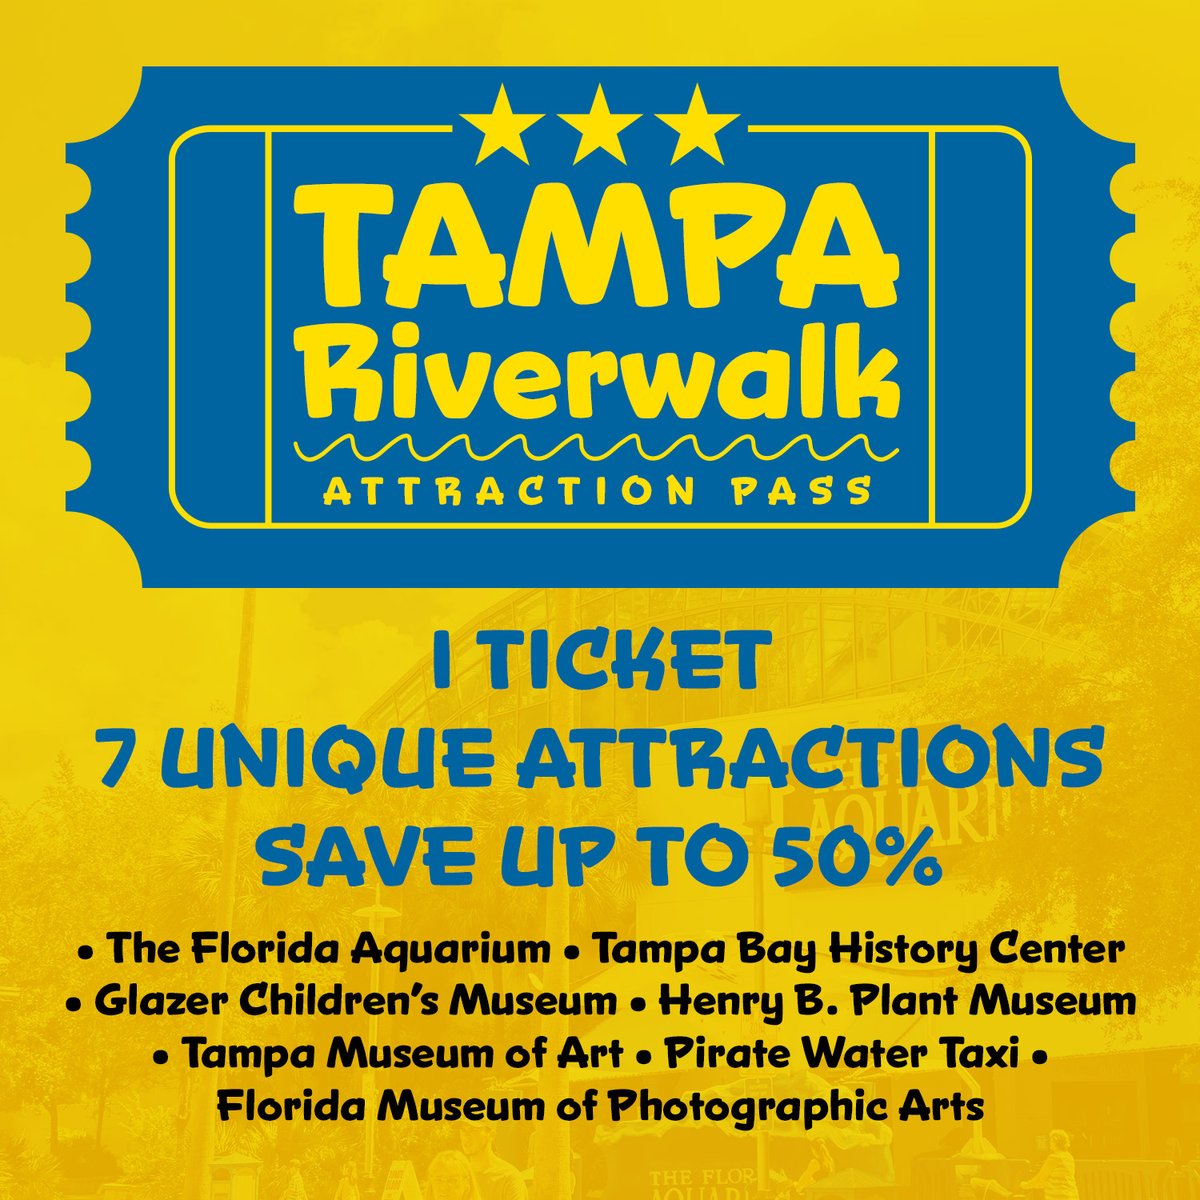 Check out this new way to explore Tampa's art and culture attractions along the @tampariverwalk. 👇 https://t.co/DMohBtyGqq